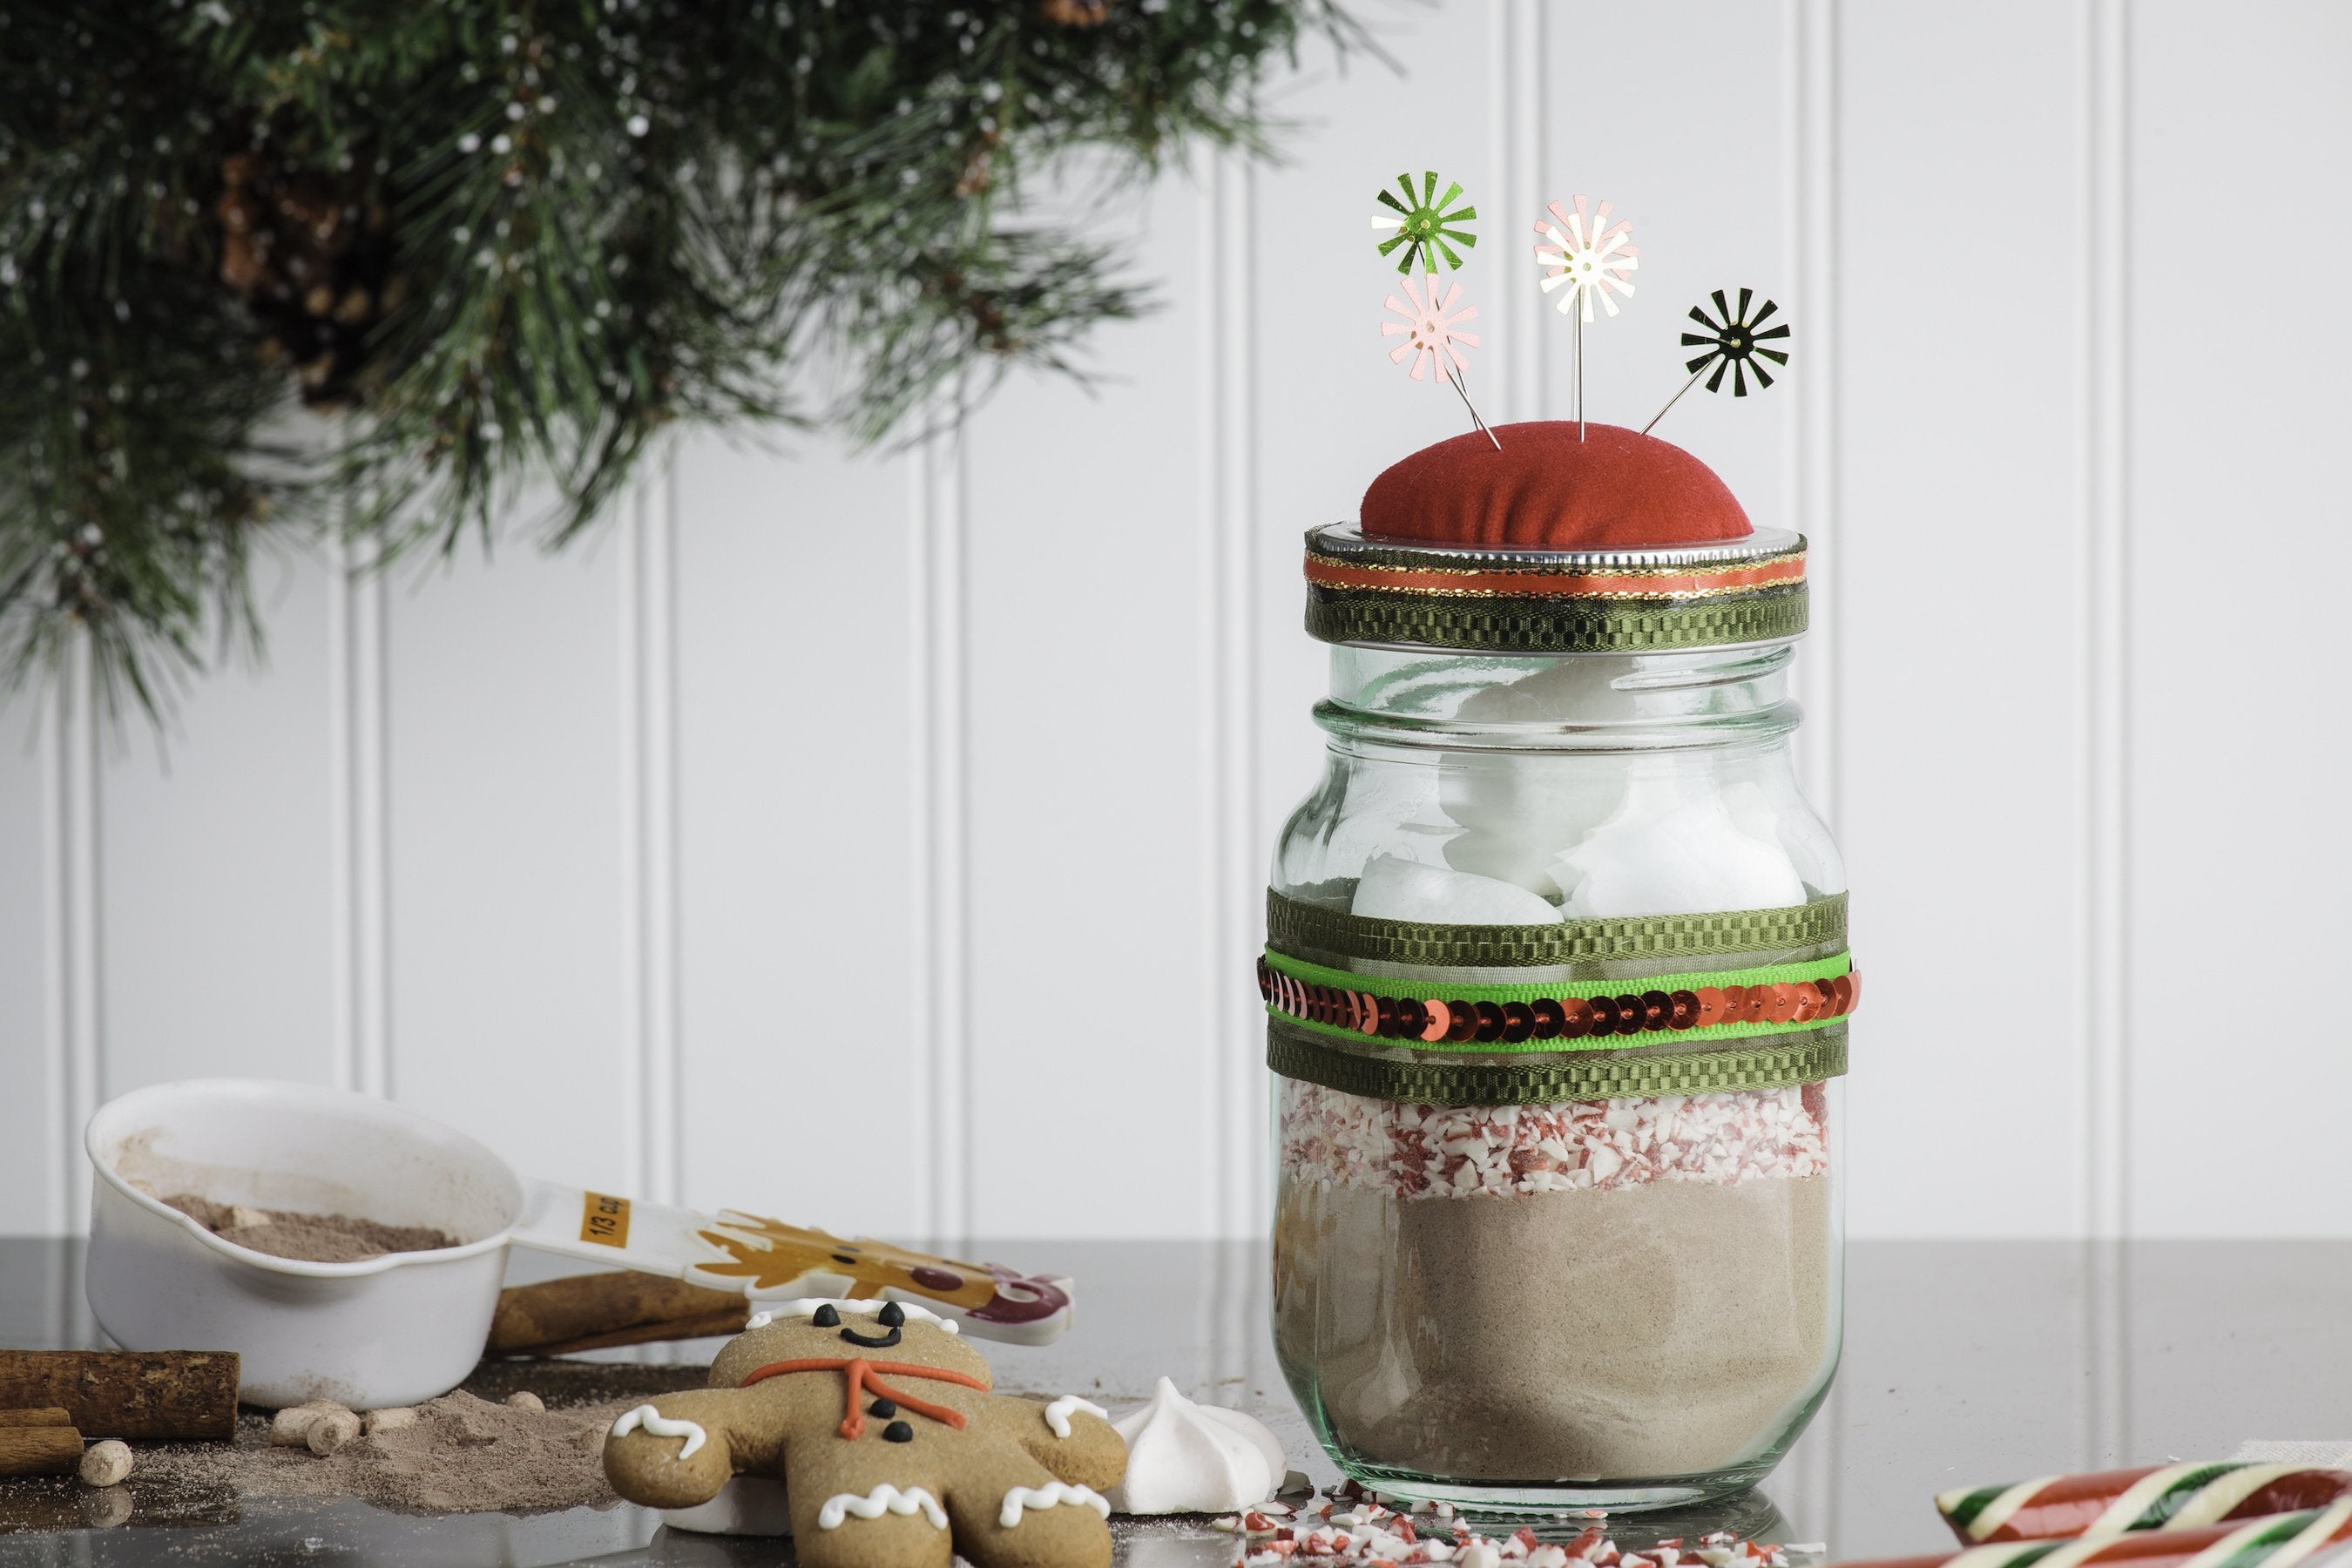 Homemade Christmas Gift Ideas Your Family & Friends Will Love